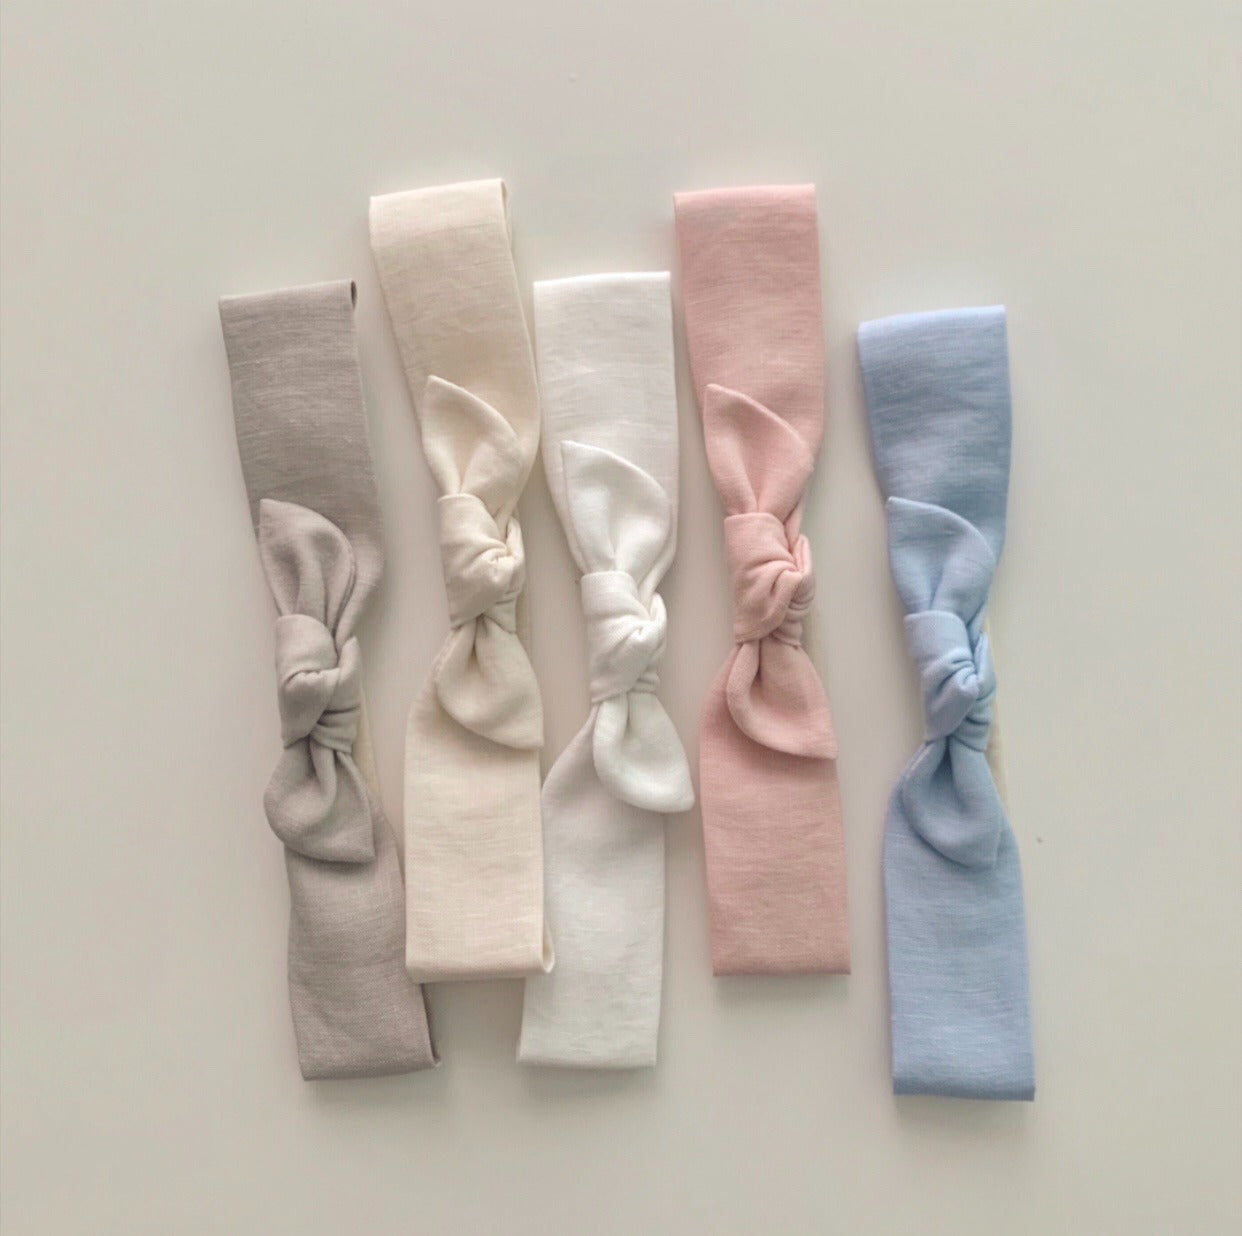 newborn and babies tie-knot headband in 5 colors